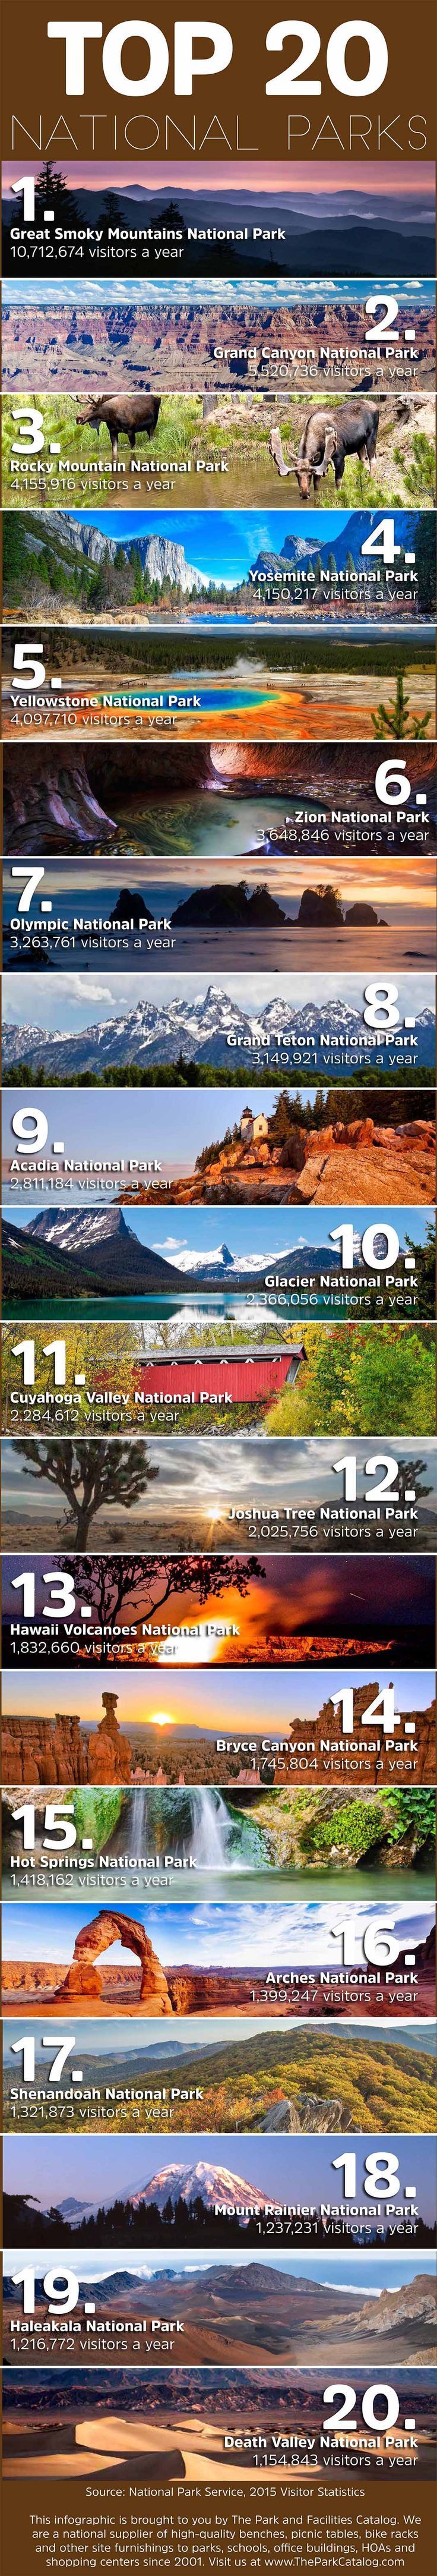 Its National Parks Week, which means you can enter national parks for FREE! Get out and enjoy nature!